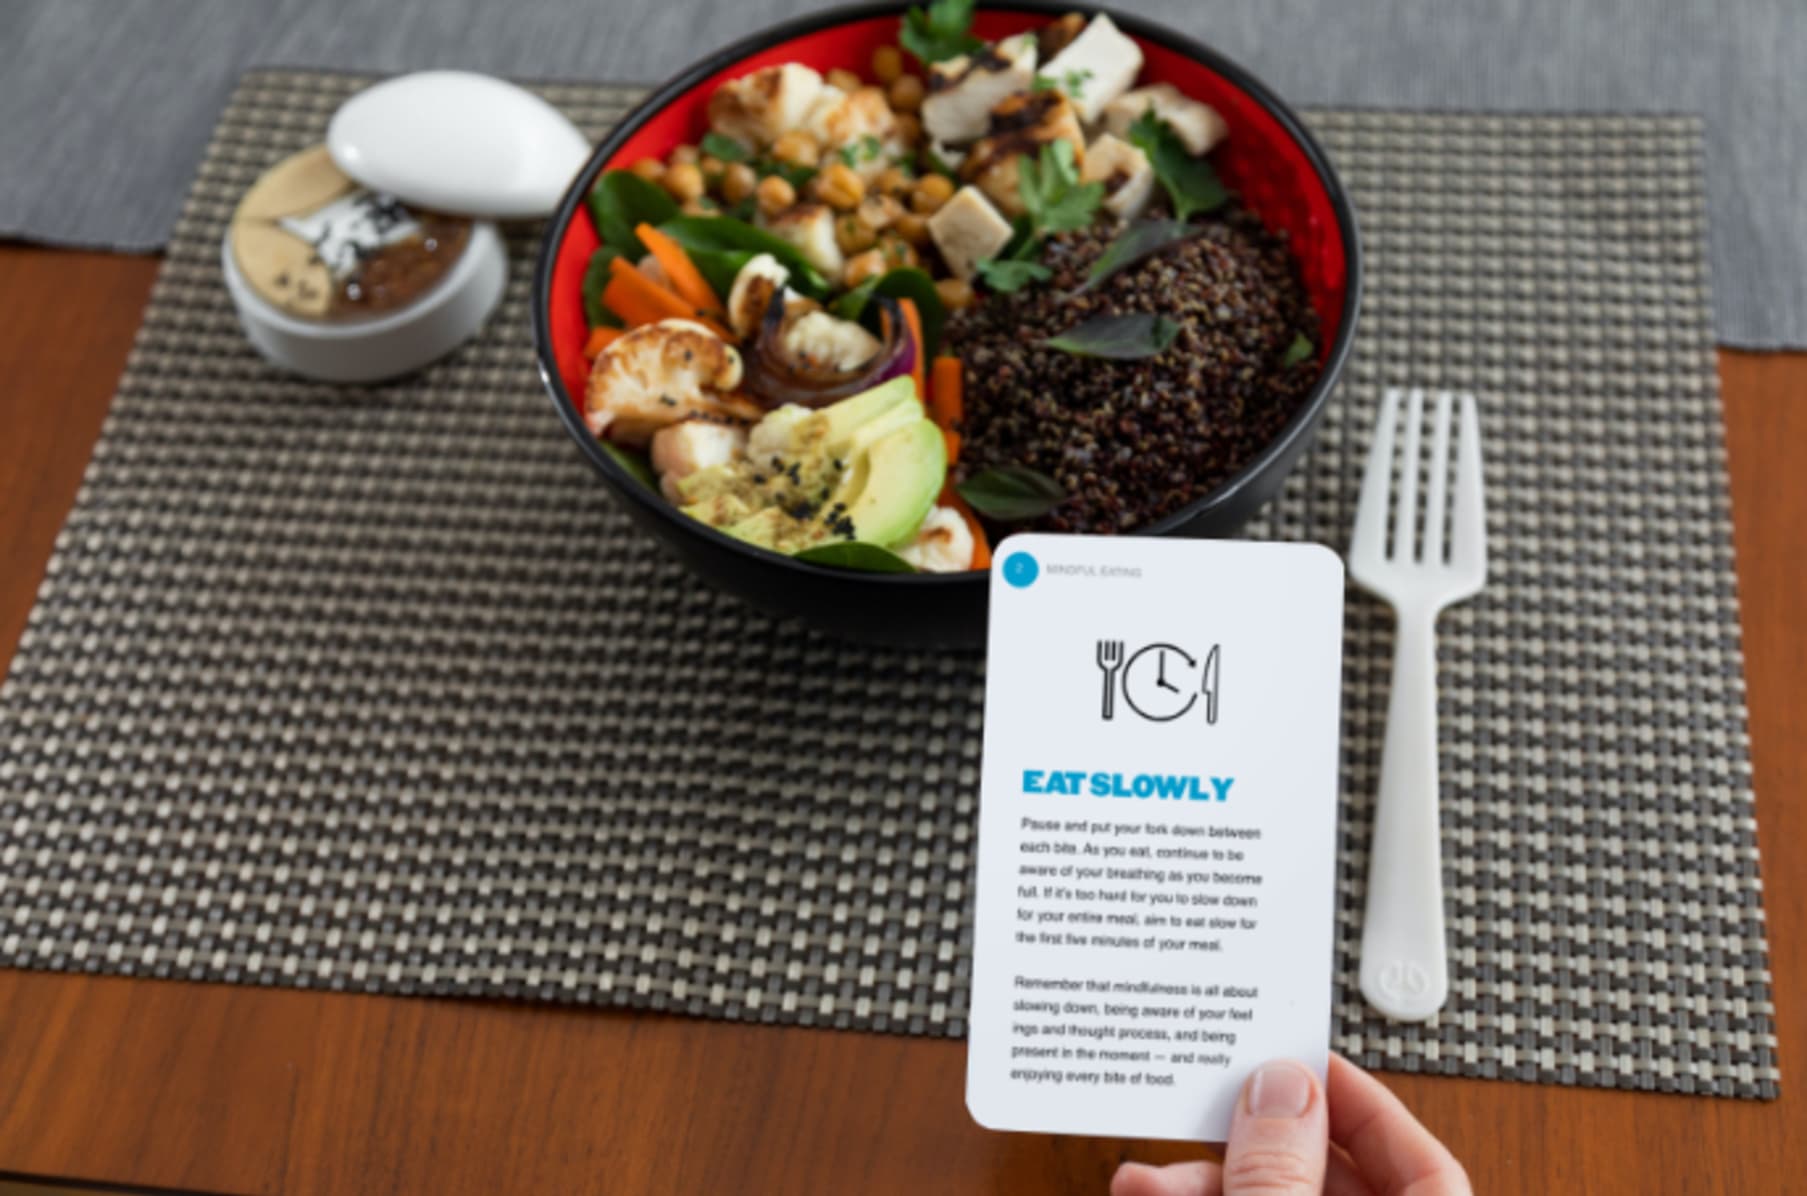 The IGGI Portion Control Bowl Uses Psychology and Smarts to Help You Diet